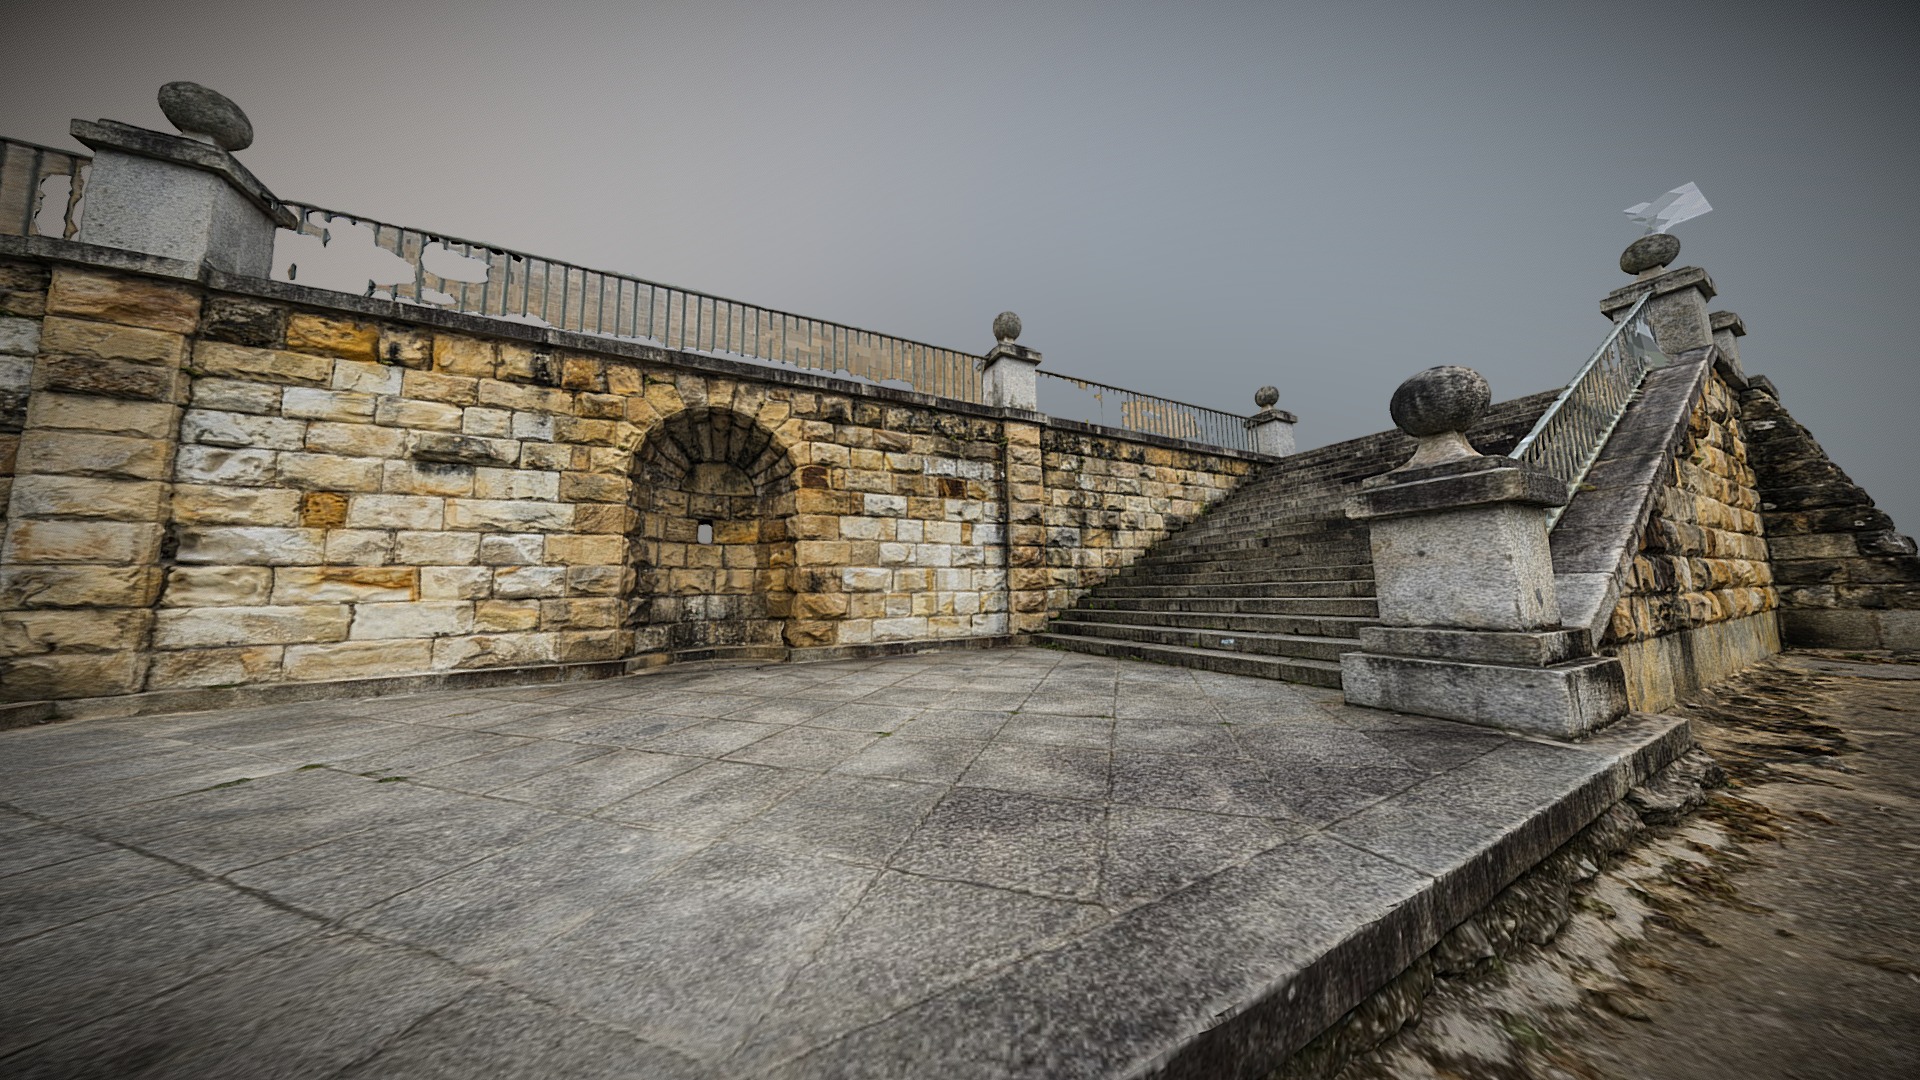 3D model Stone Stairs photogrammetry scan - This is a 3D model of the Stone Stairs photogrammetry scan. The 3D model is about a stone wall with a stone walkway.